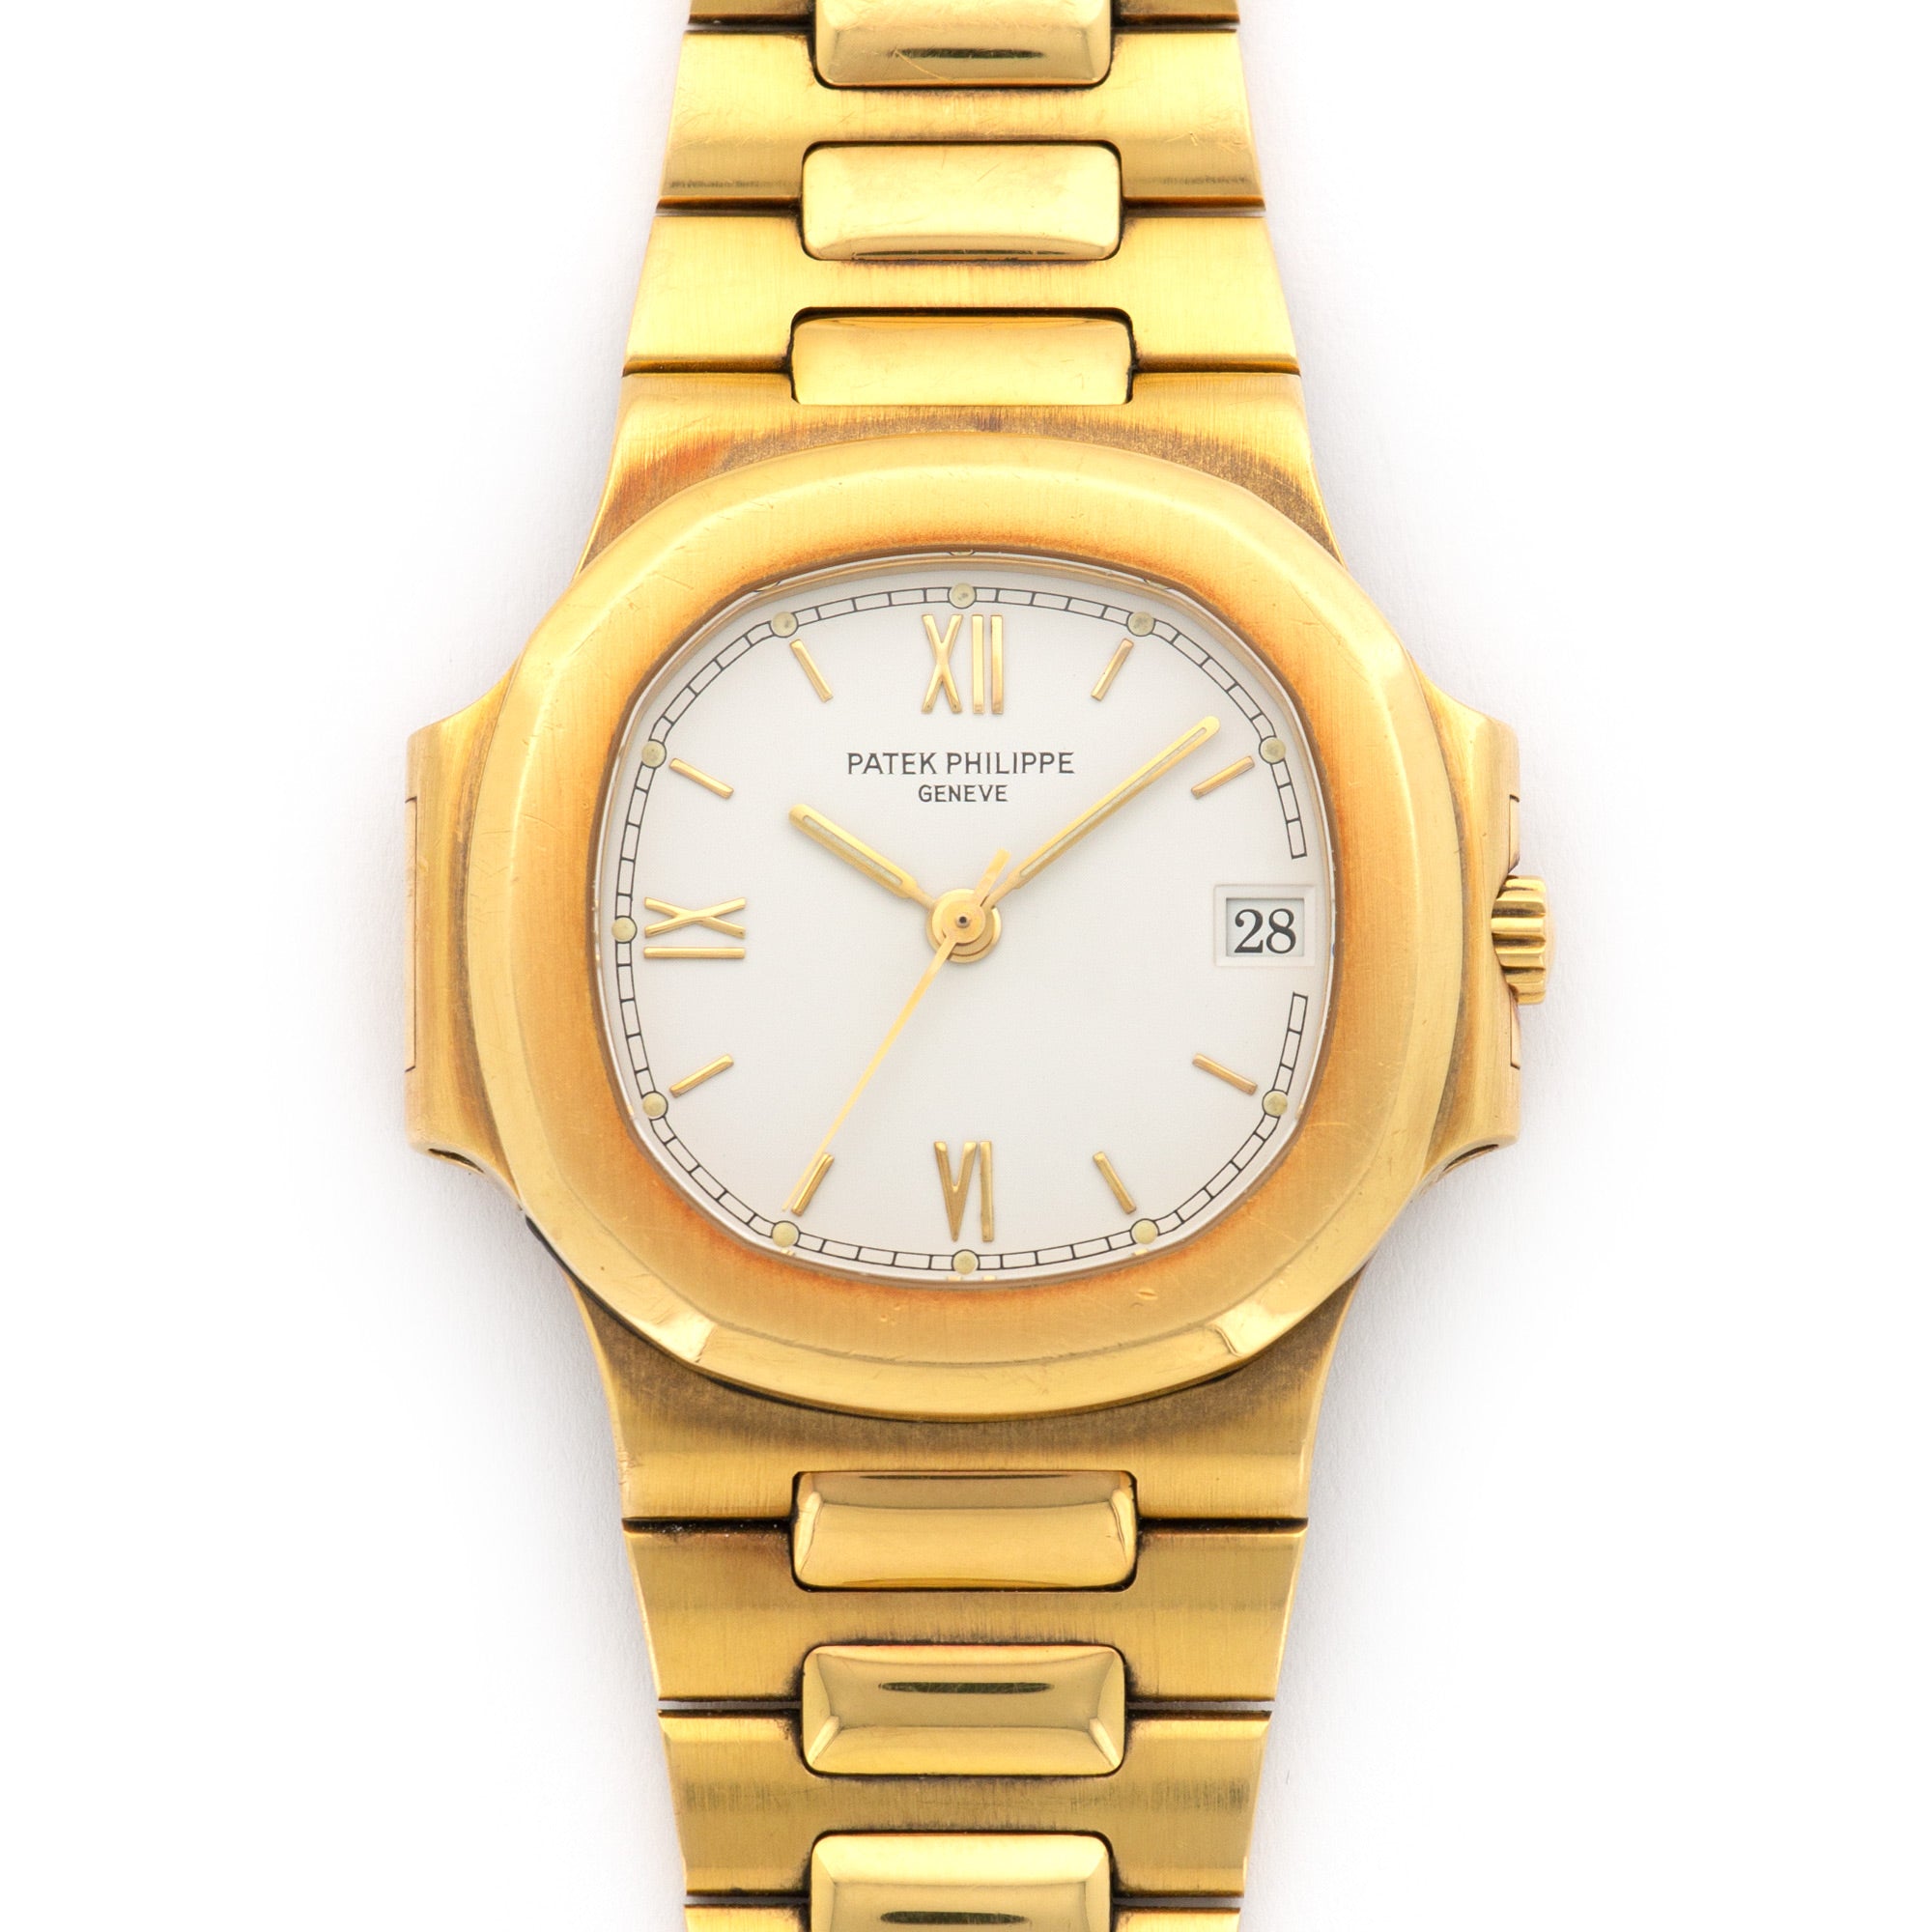 Patek Philippe - Patek Philippe Yellow Gold Nautilus Watch Ref. 3800 with Original Box and Papers - The Keystone Watches